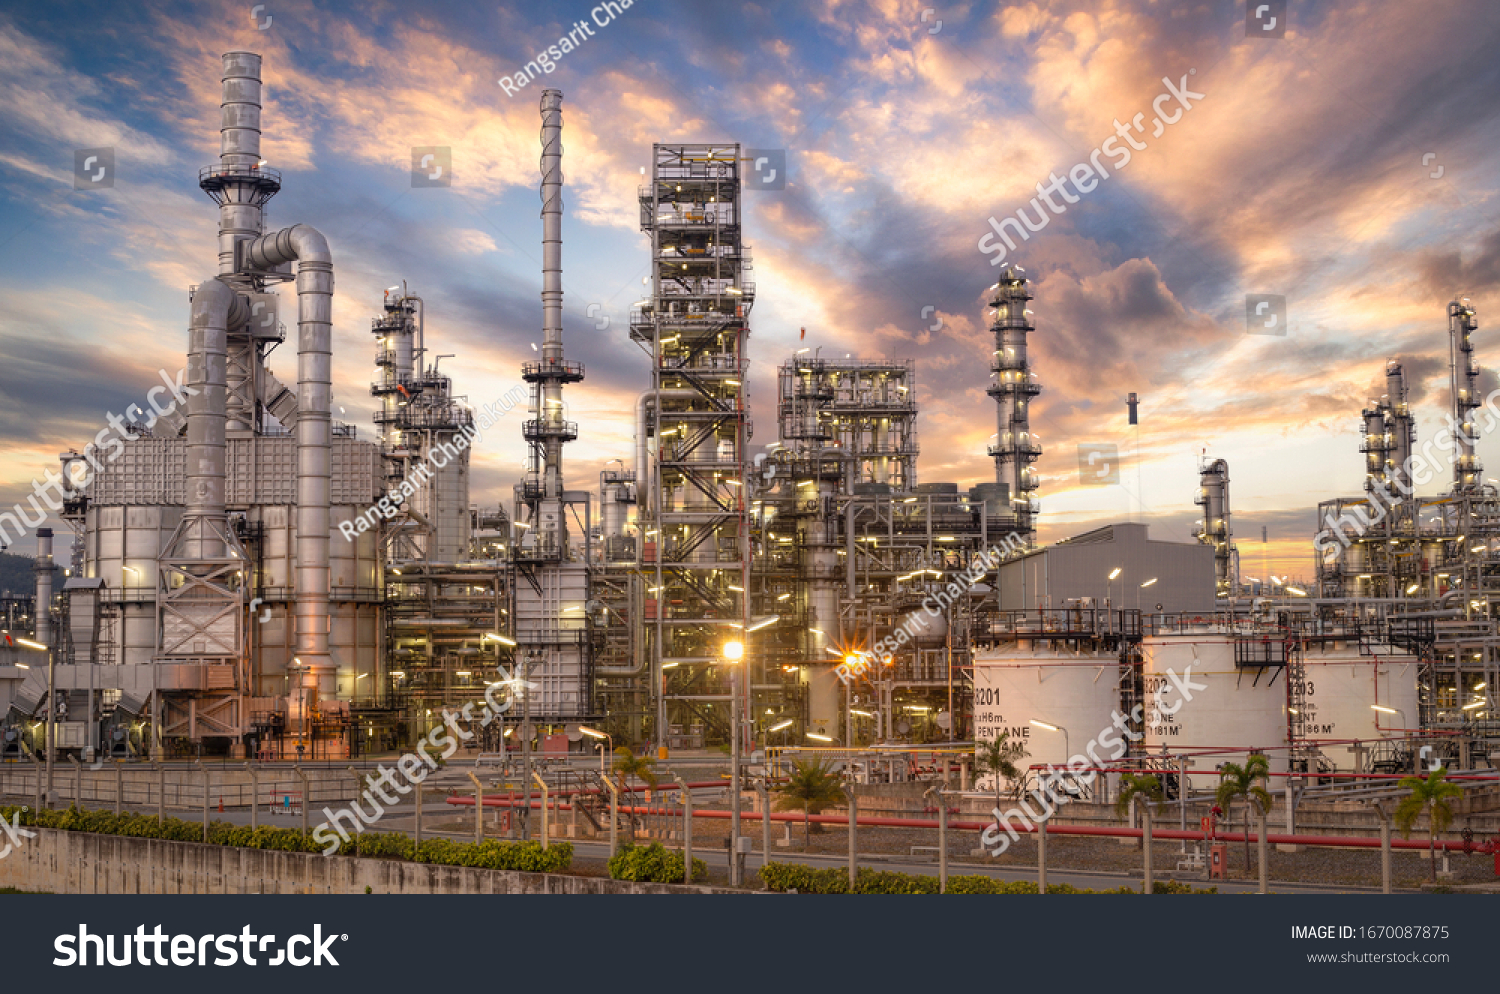 Oil and Gas Industrial zone,The equipment of oil refining,Close-up of industrial pipelines of an oil-refinery plant,Detail of oil pipeline with valves in large oil refinery. #1670087875